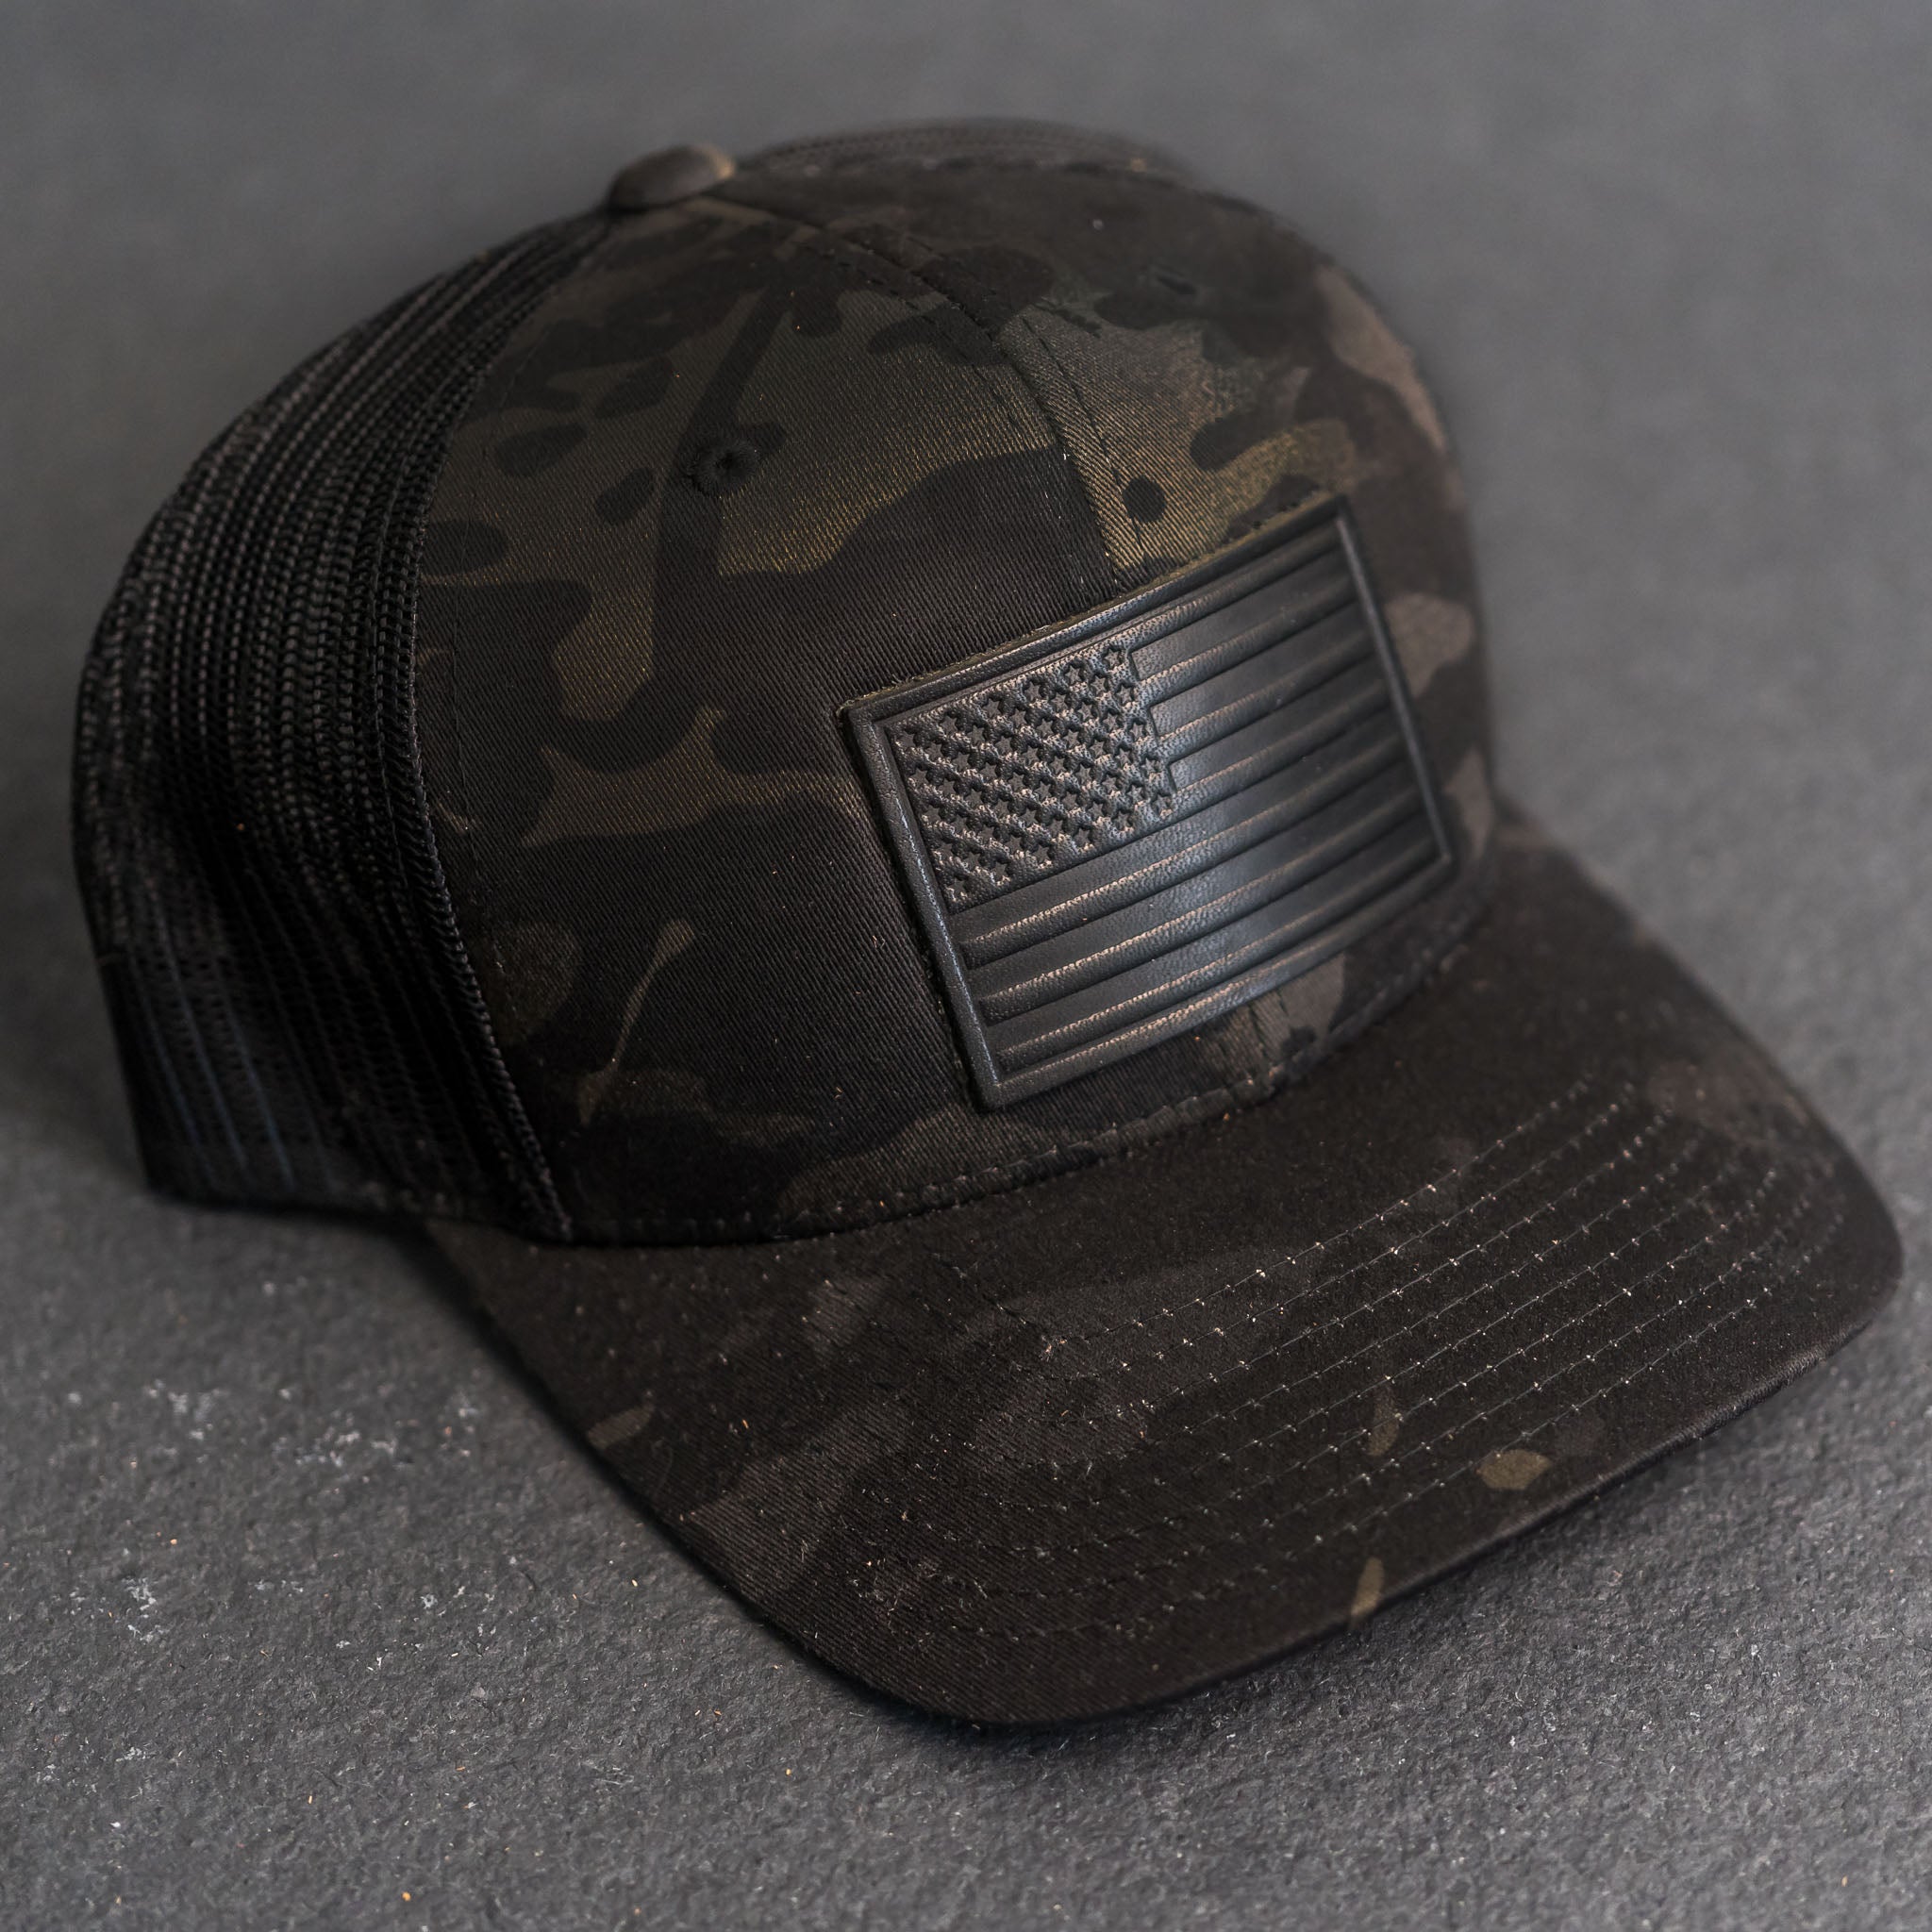 Leather Patch Trucker Style Hats - Black Multicam w/Black Leather Patch - American Flag Your artwork/logo